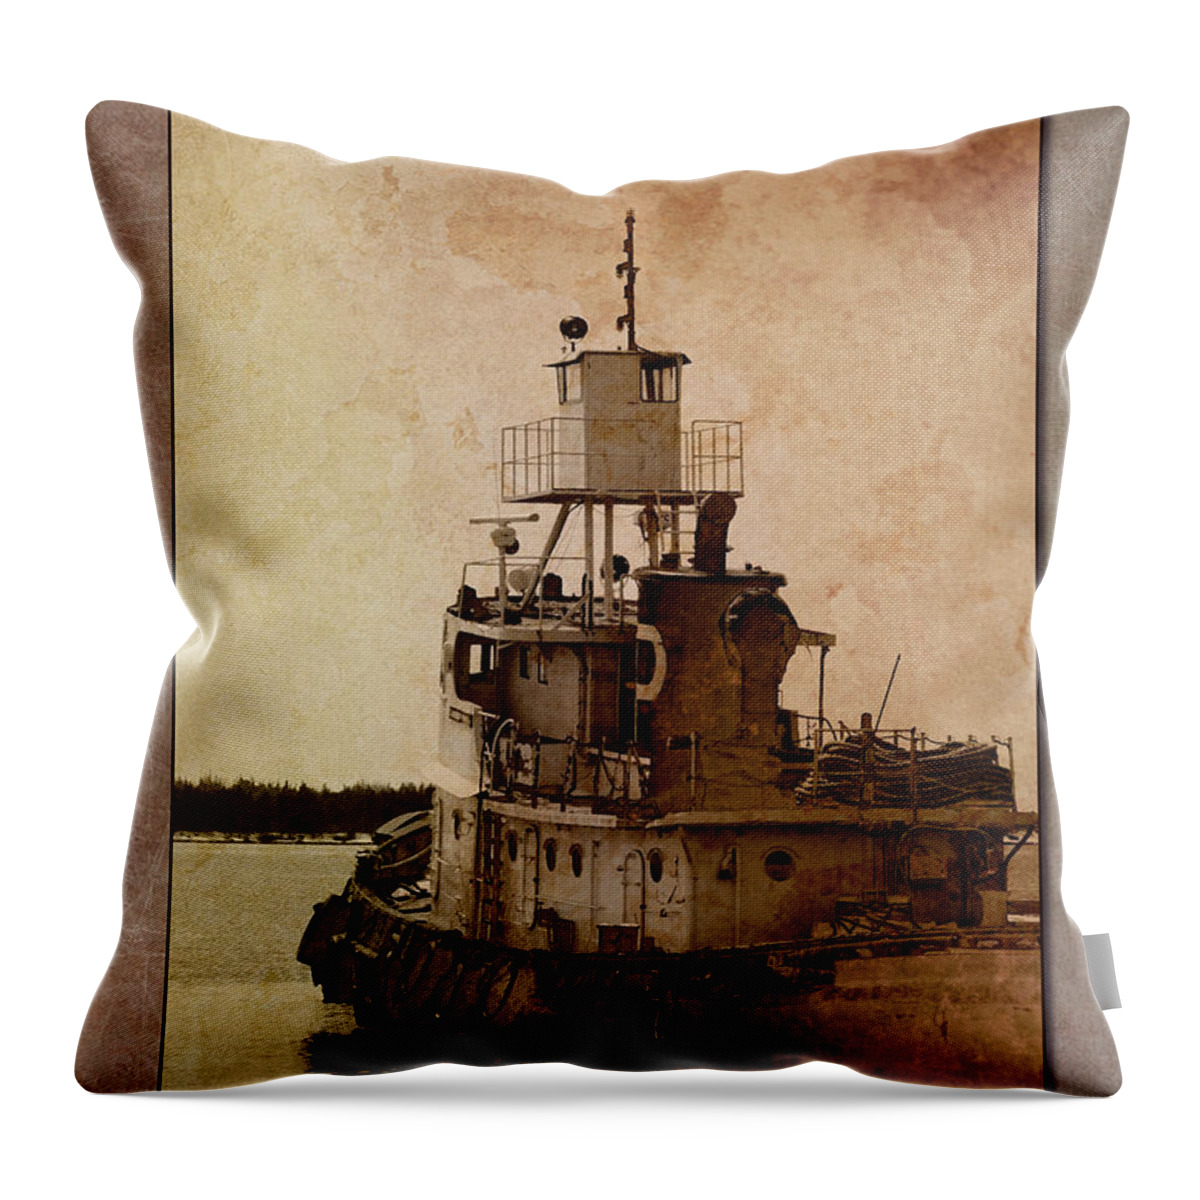 Tug Throw Pillow featuring the photograph Tug by WB Johnston